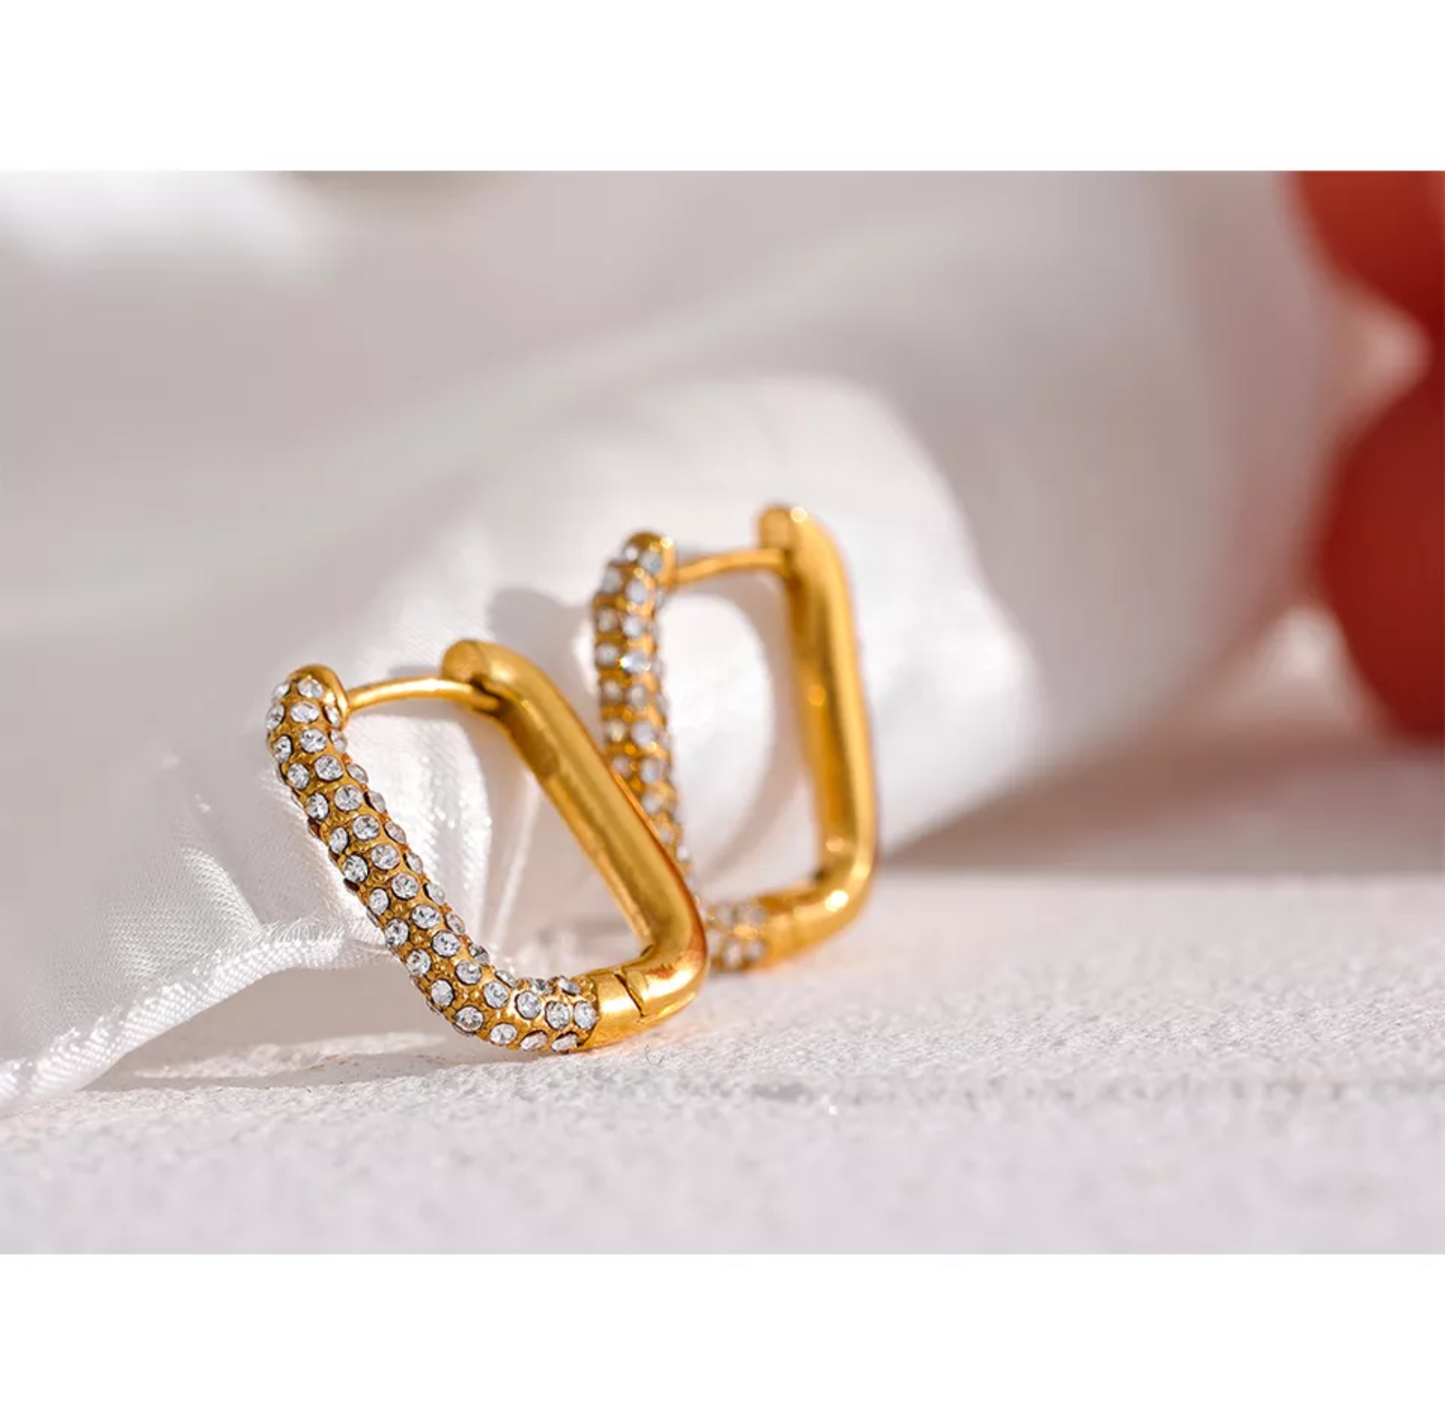 SAFIYA - New Style Hoops - Golden Collection